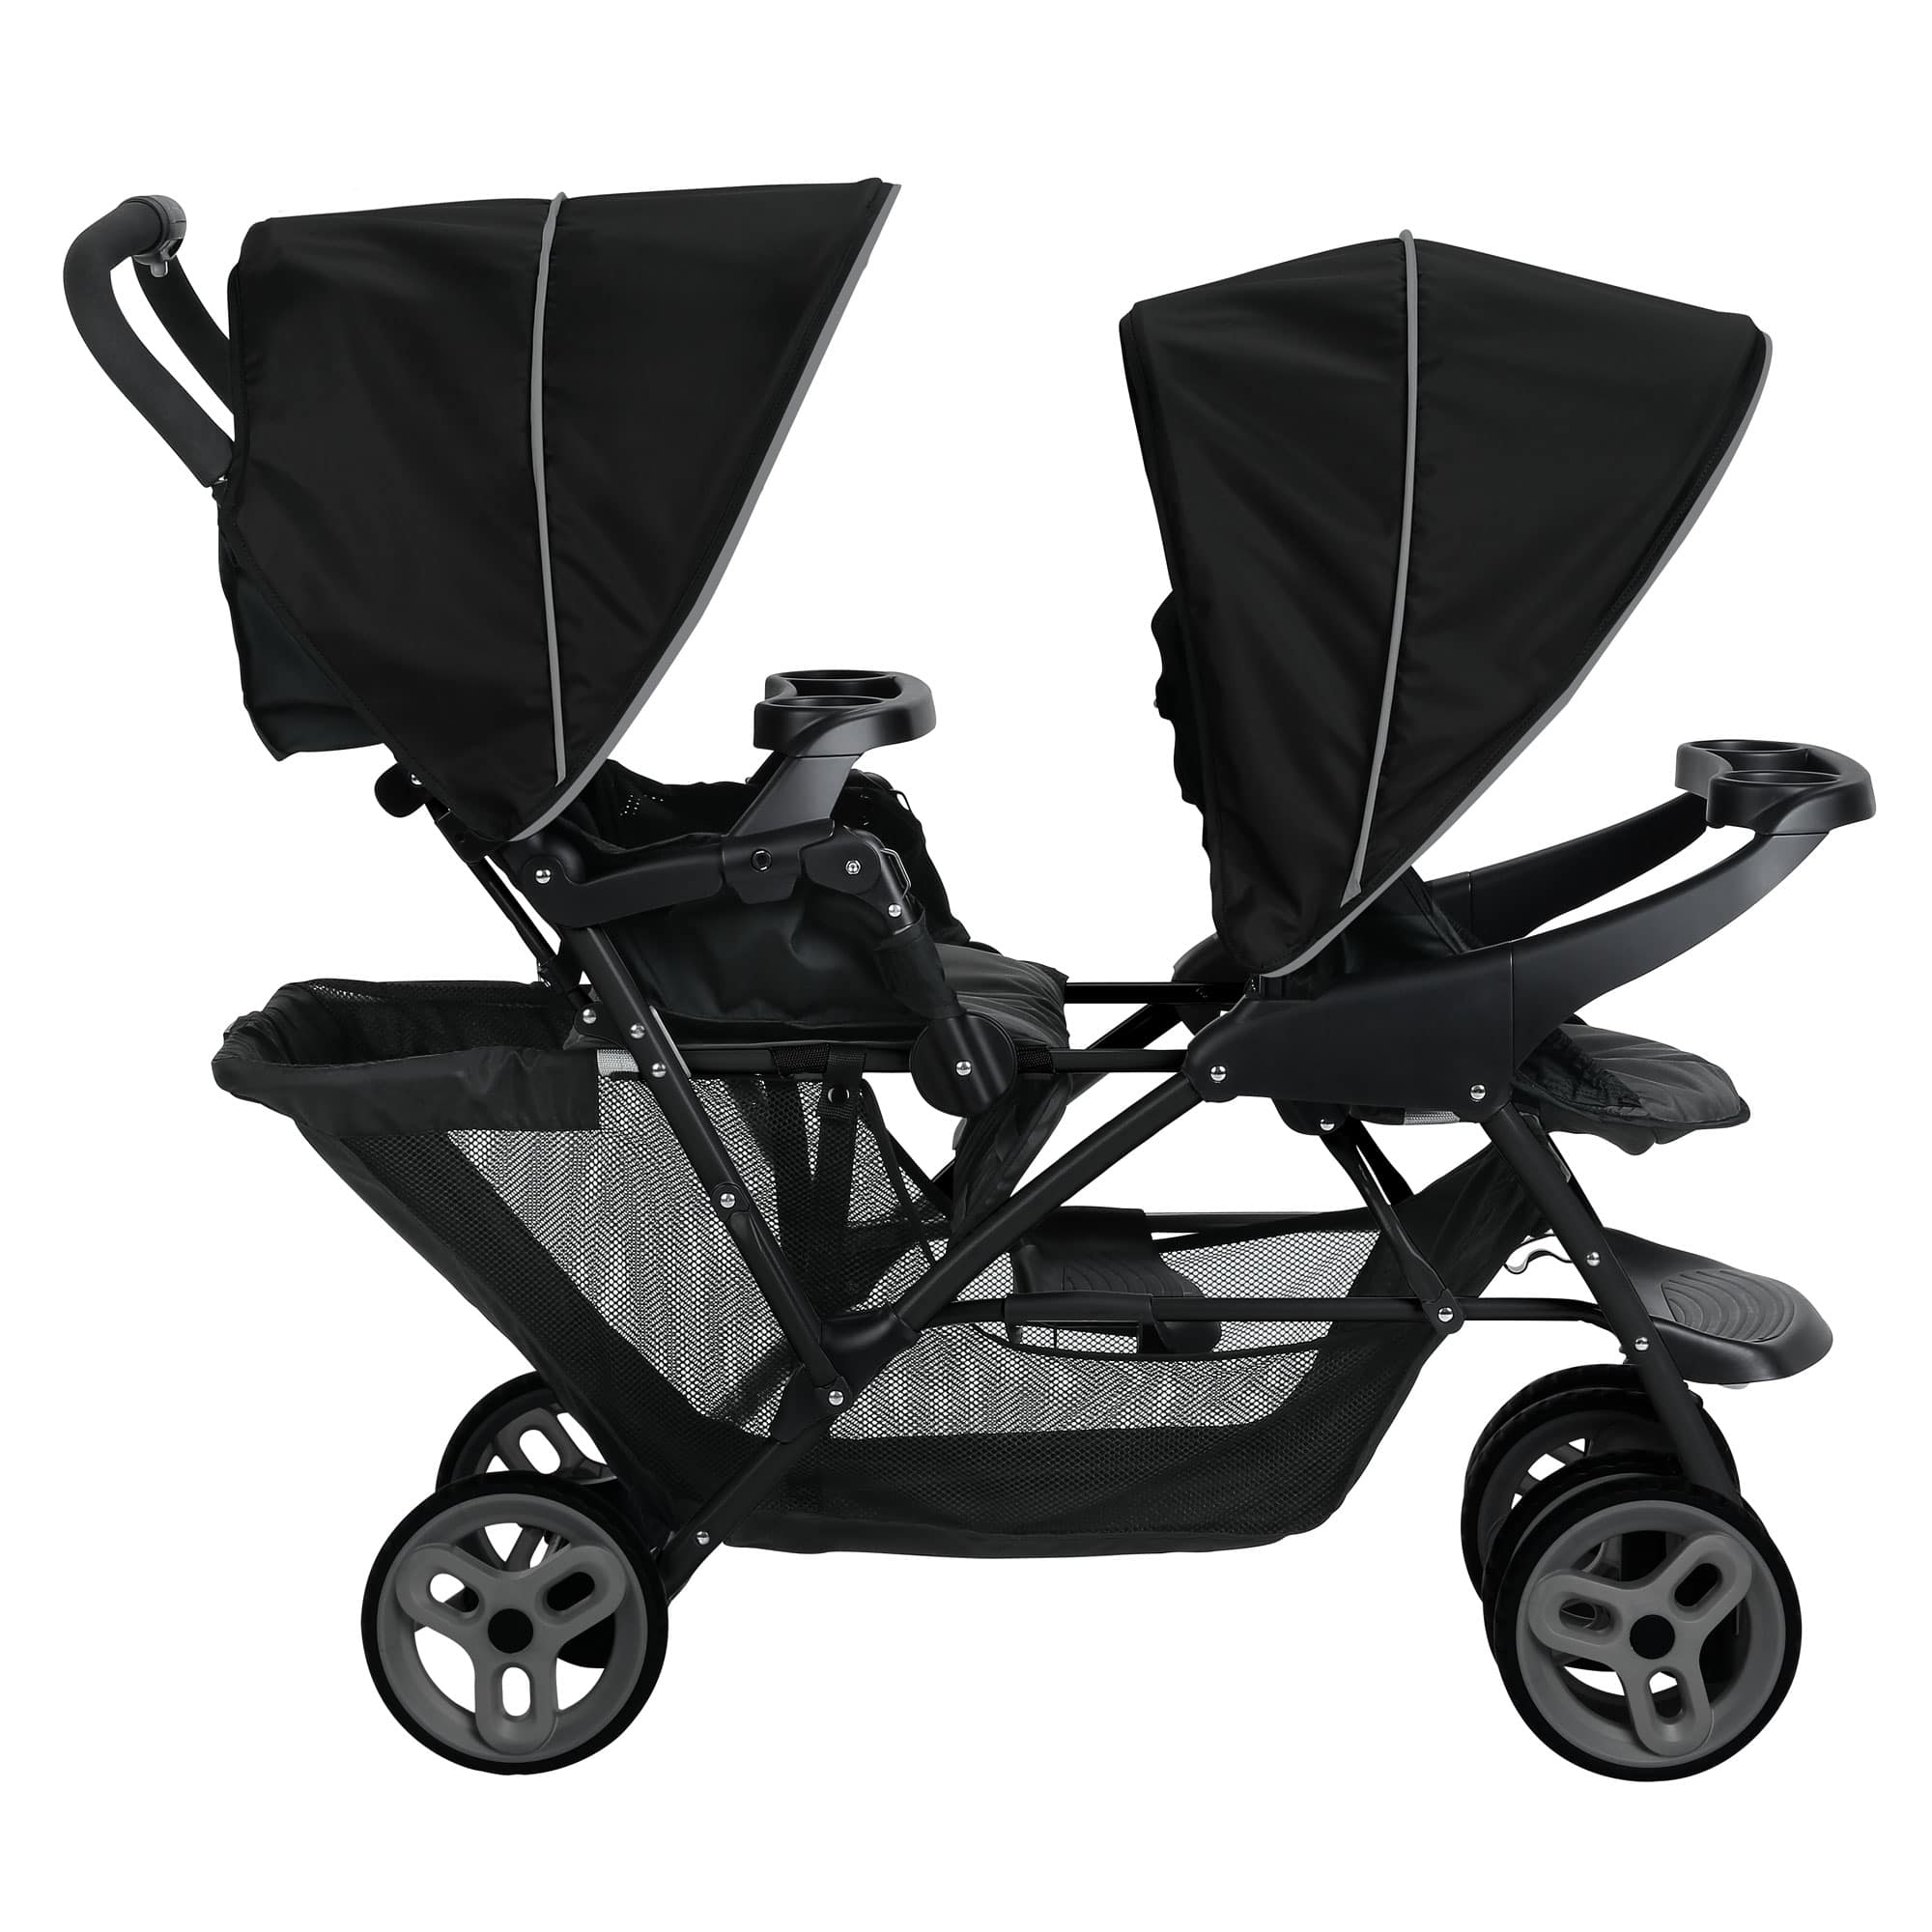 Graco Stadium Duo Tandem Stroller - Black/Grey - Baby and Child Store